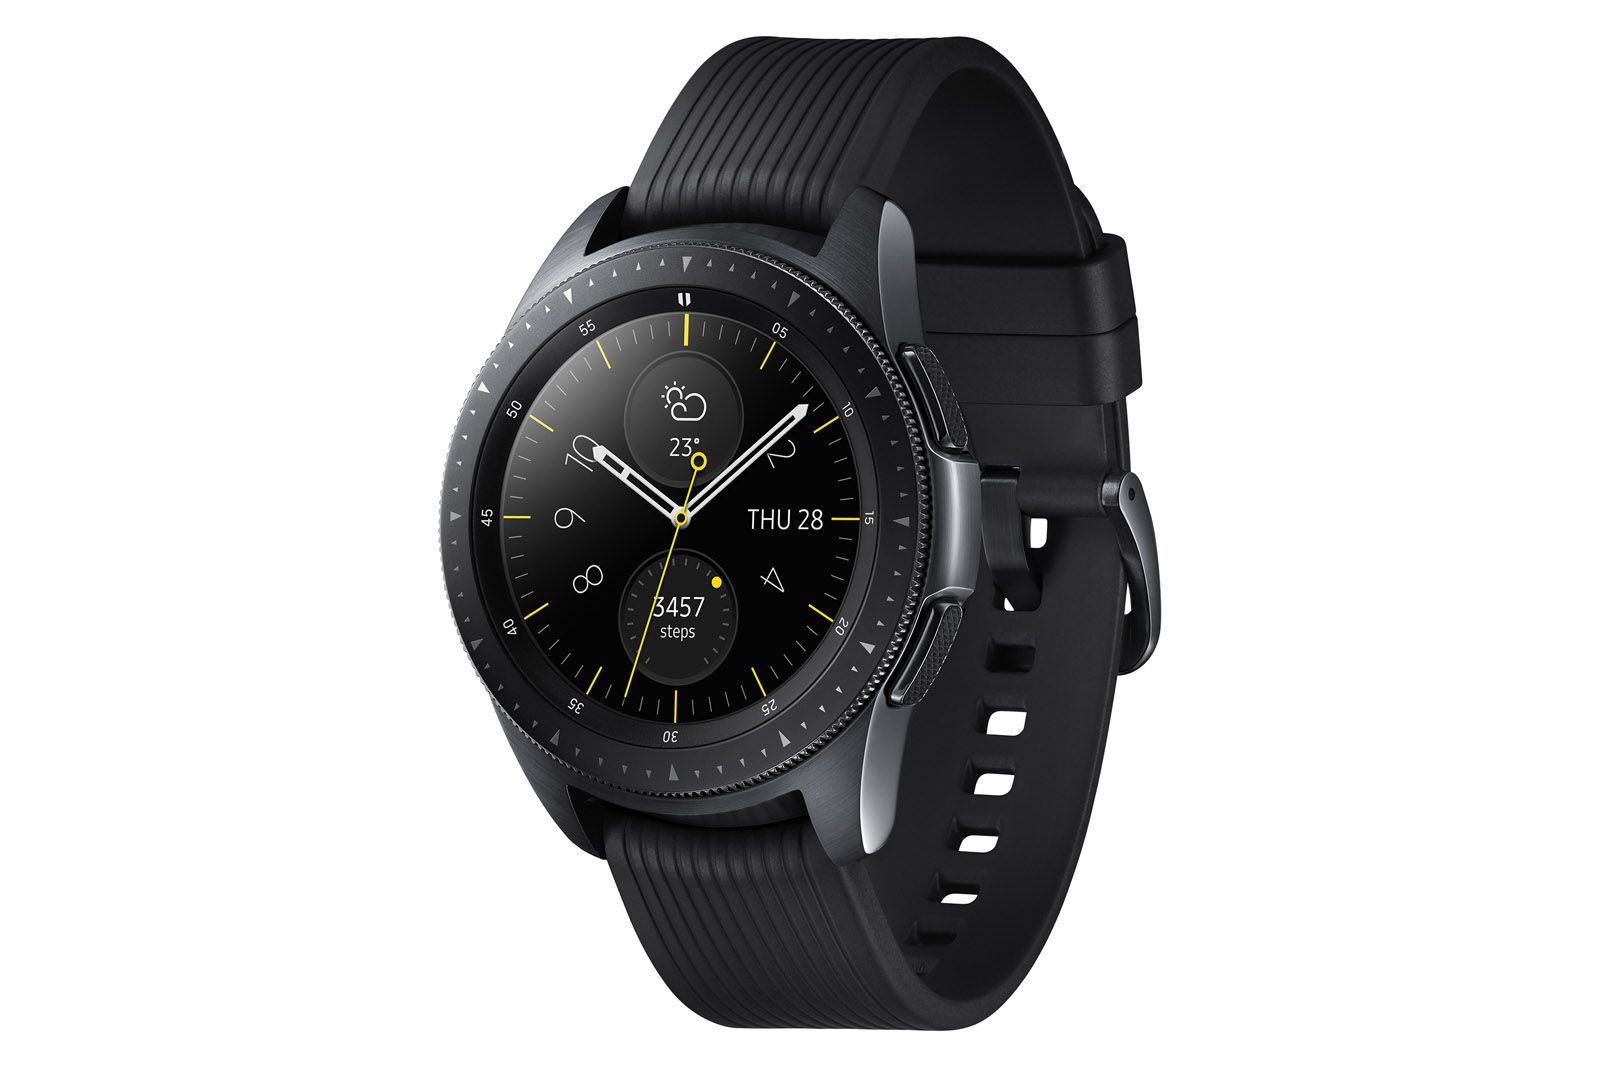 Samsung Galaxy Watch specs, release date, news and features